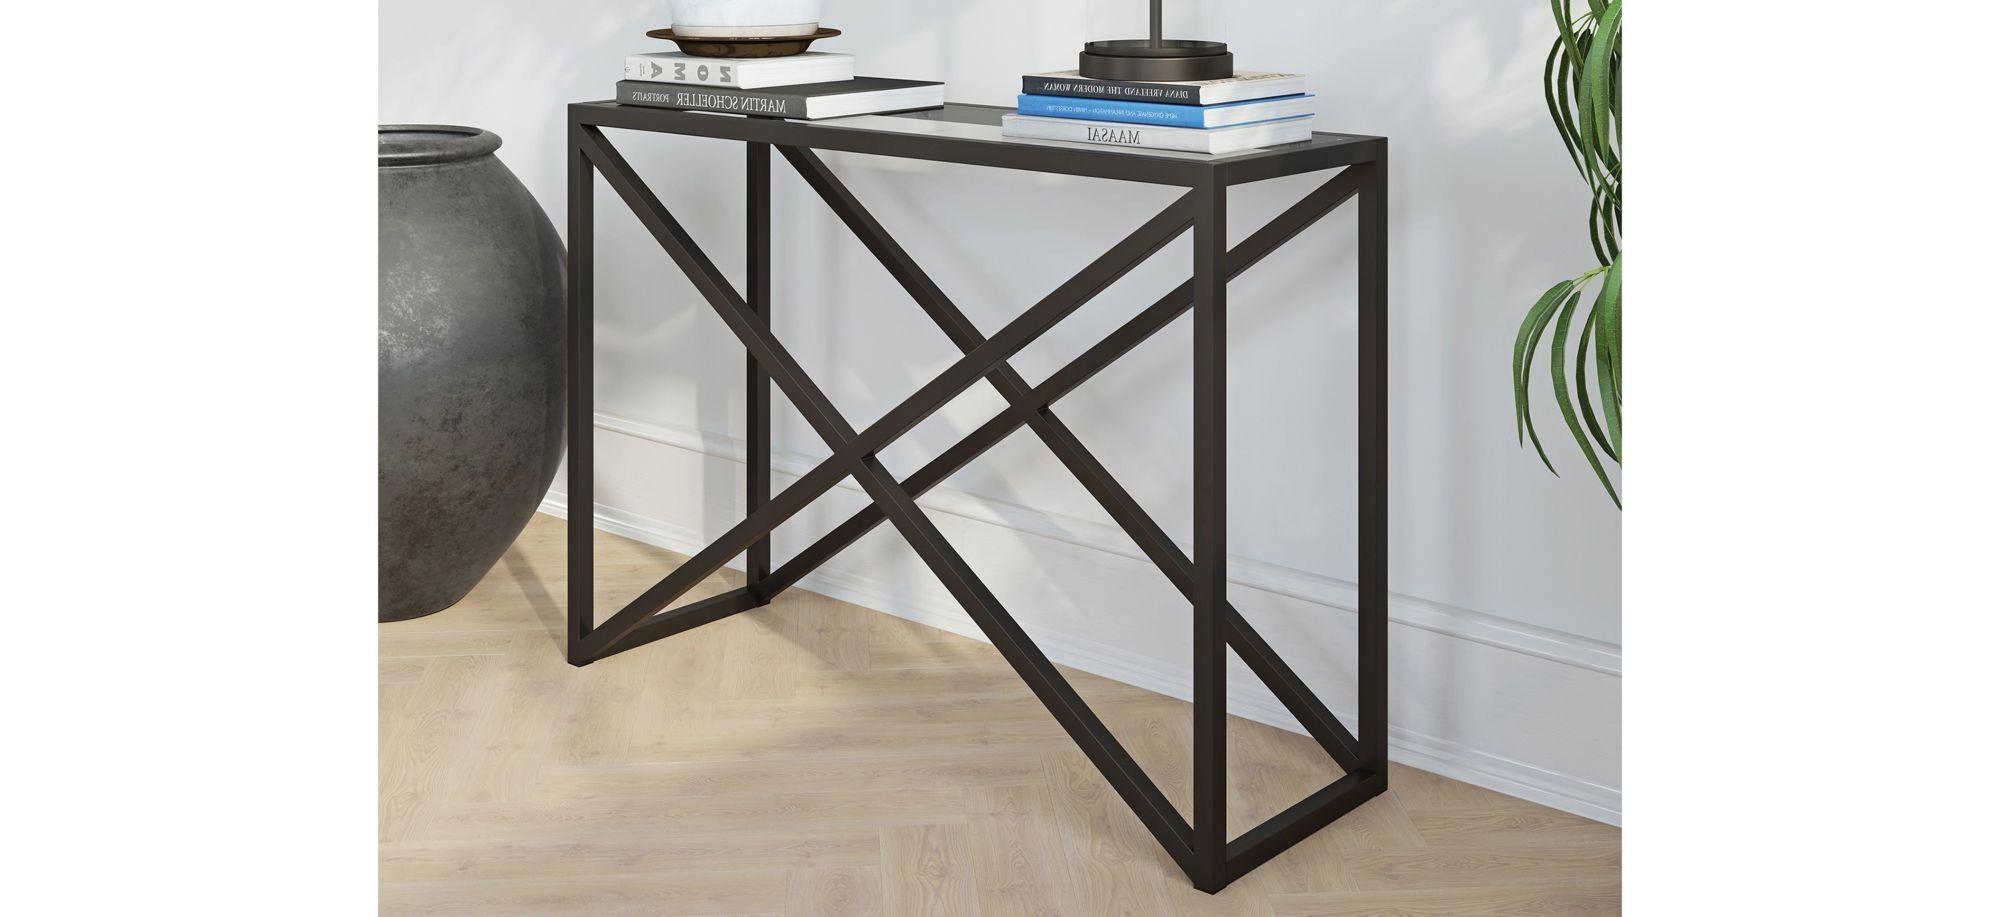 Trendy Addison&lane Calix Square Tables With Regard To Calix Rectangular Console Table (View 14 of 15)